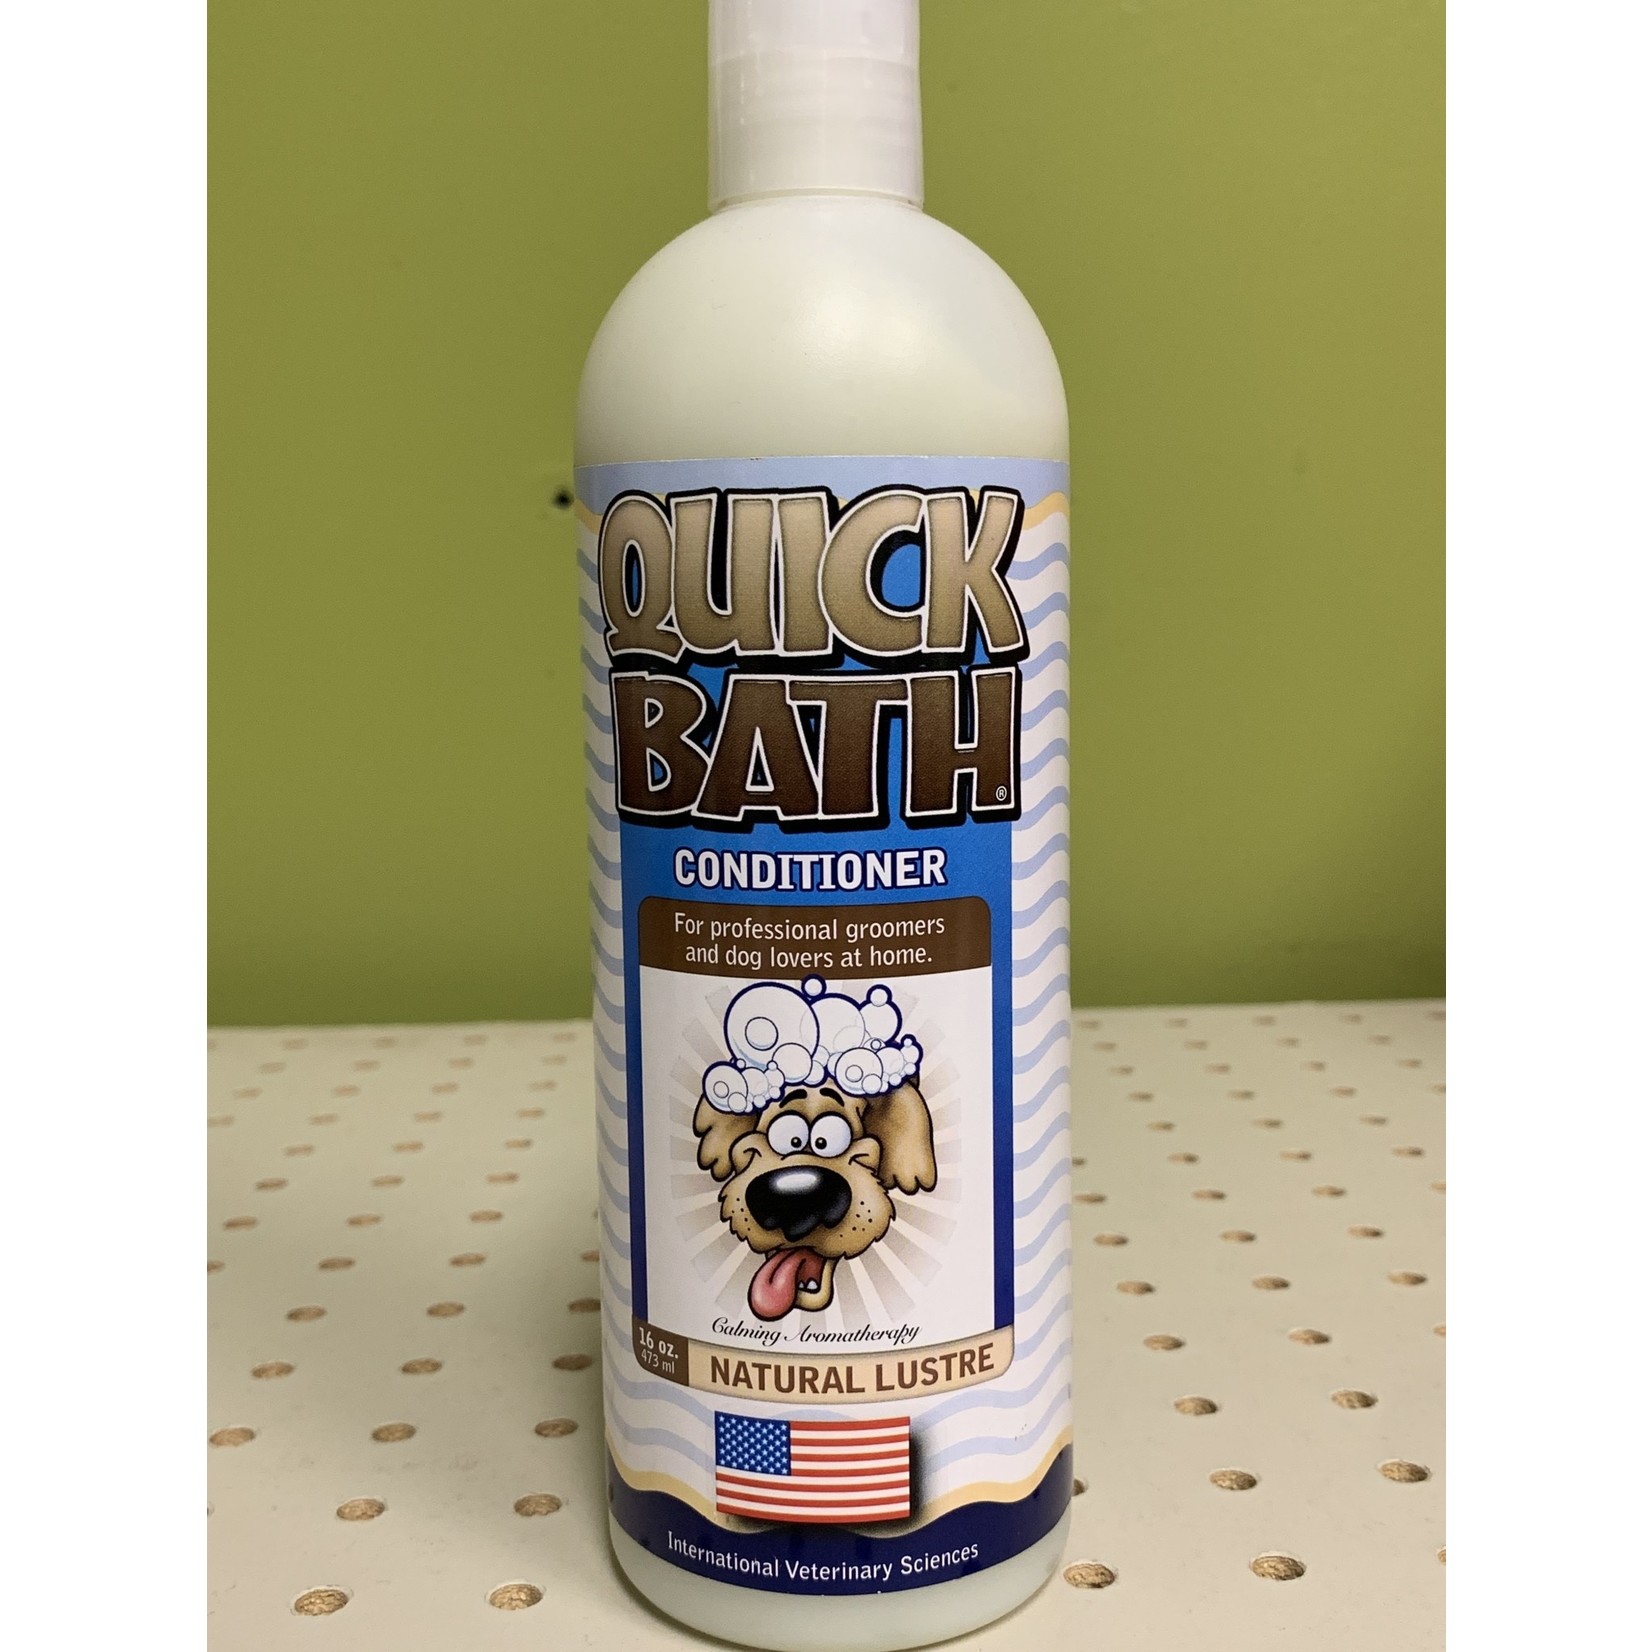 Quick bath QUICK BATH: Natural Luster Conditioner 160Z for professional groomers and dog lovers at home